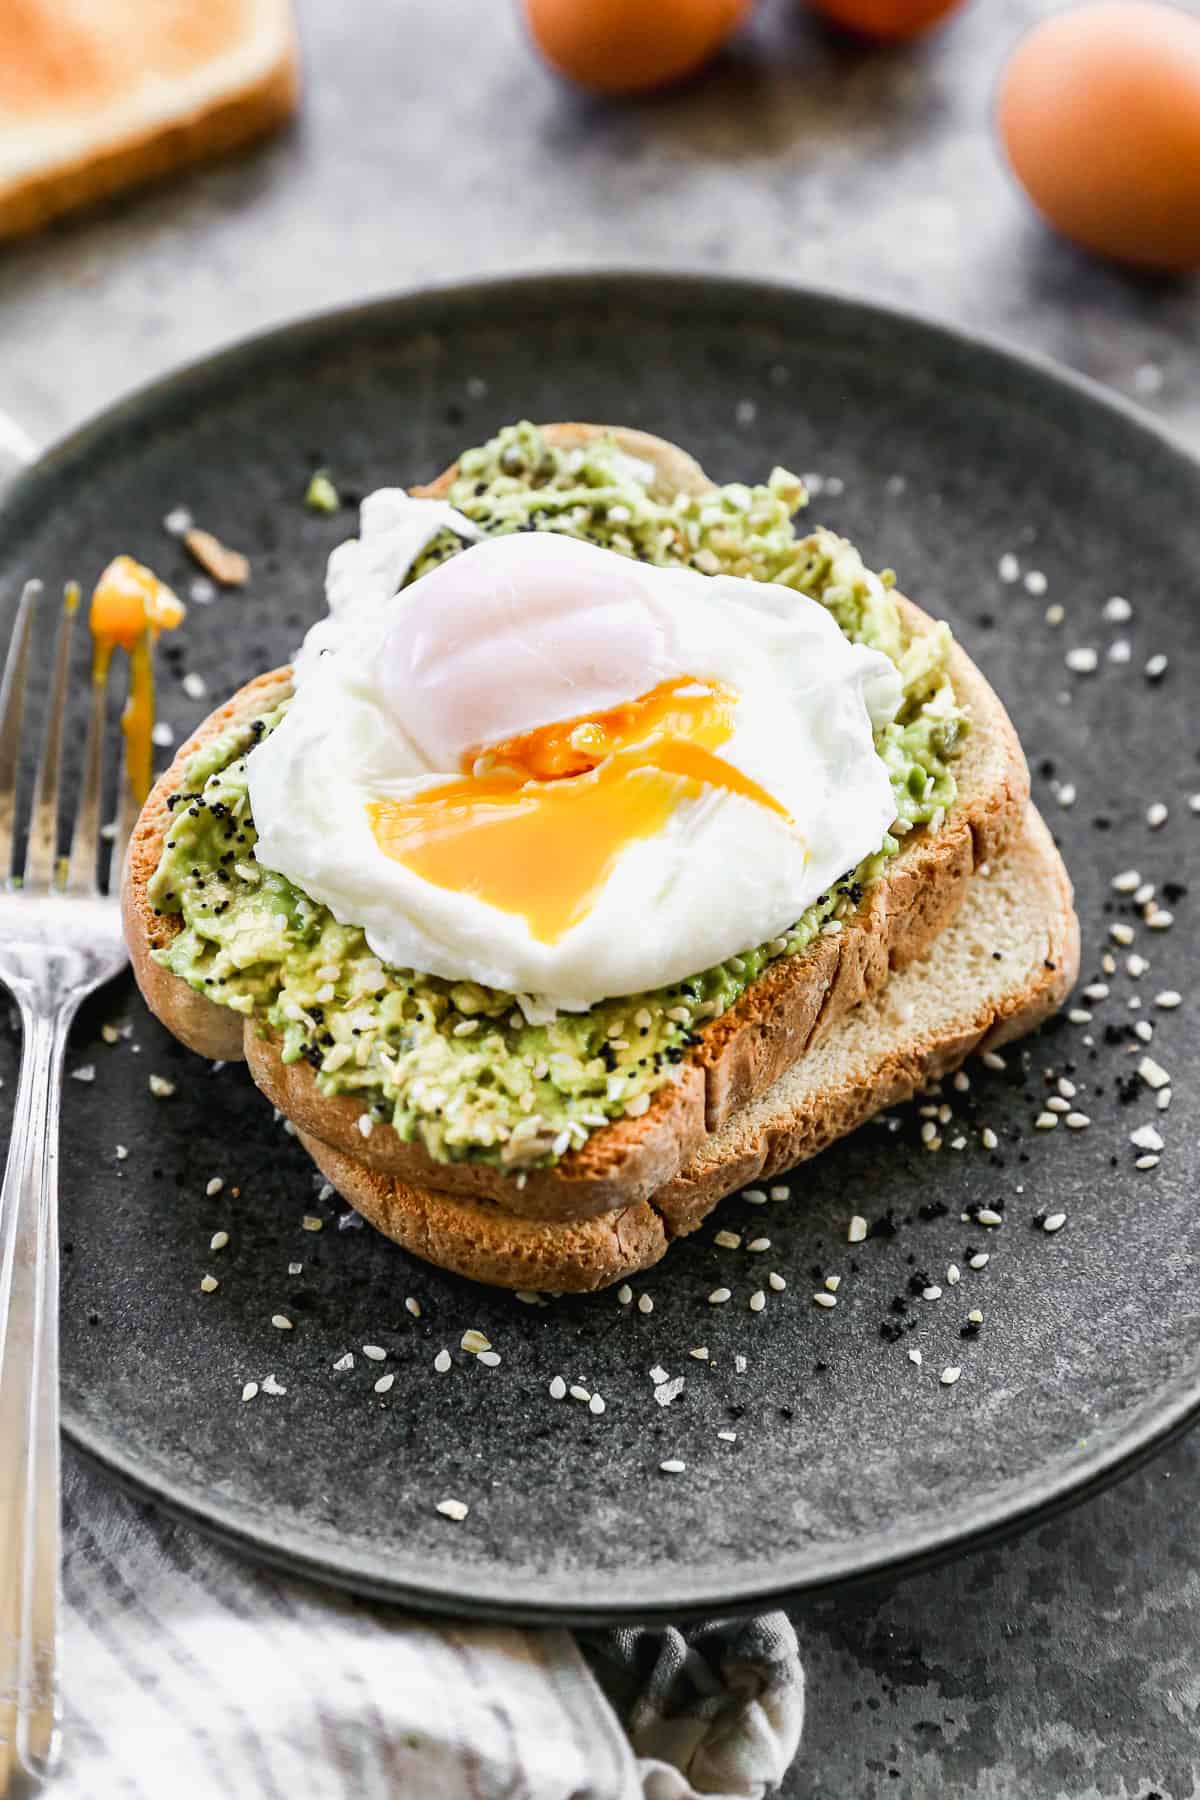 A poached egg slightly cut to reveal the yolk on top of a slice of avocado toast.